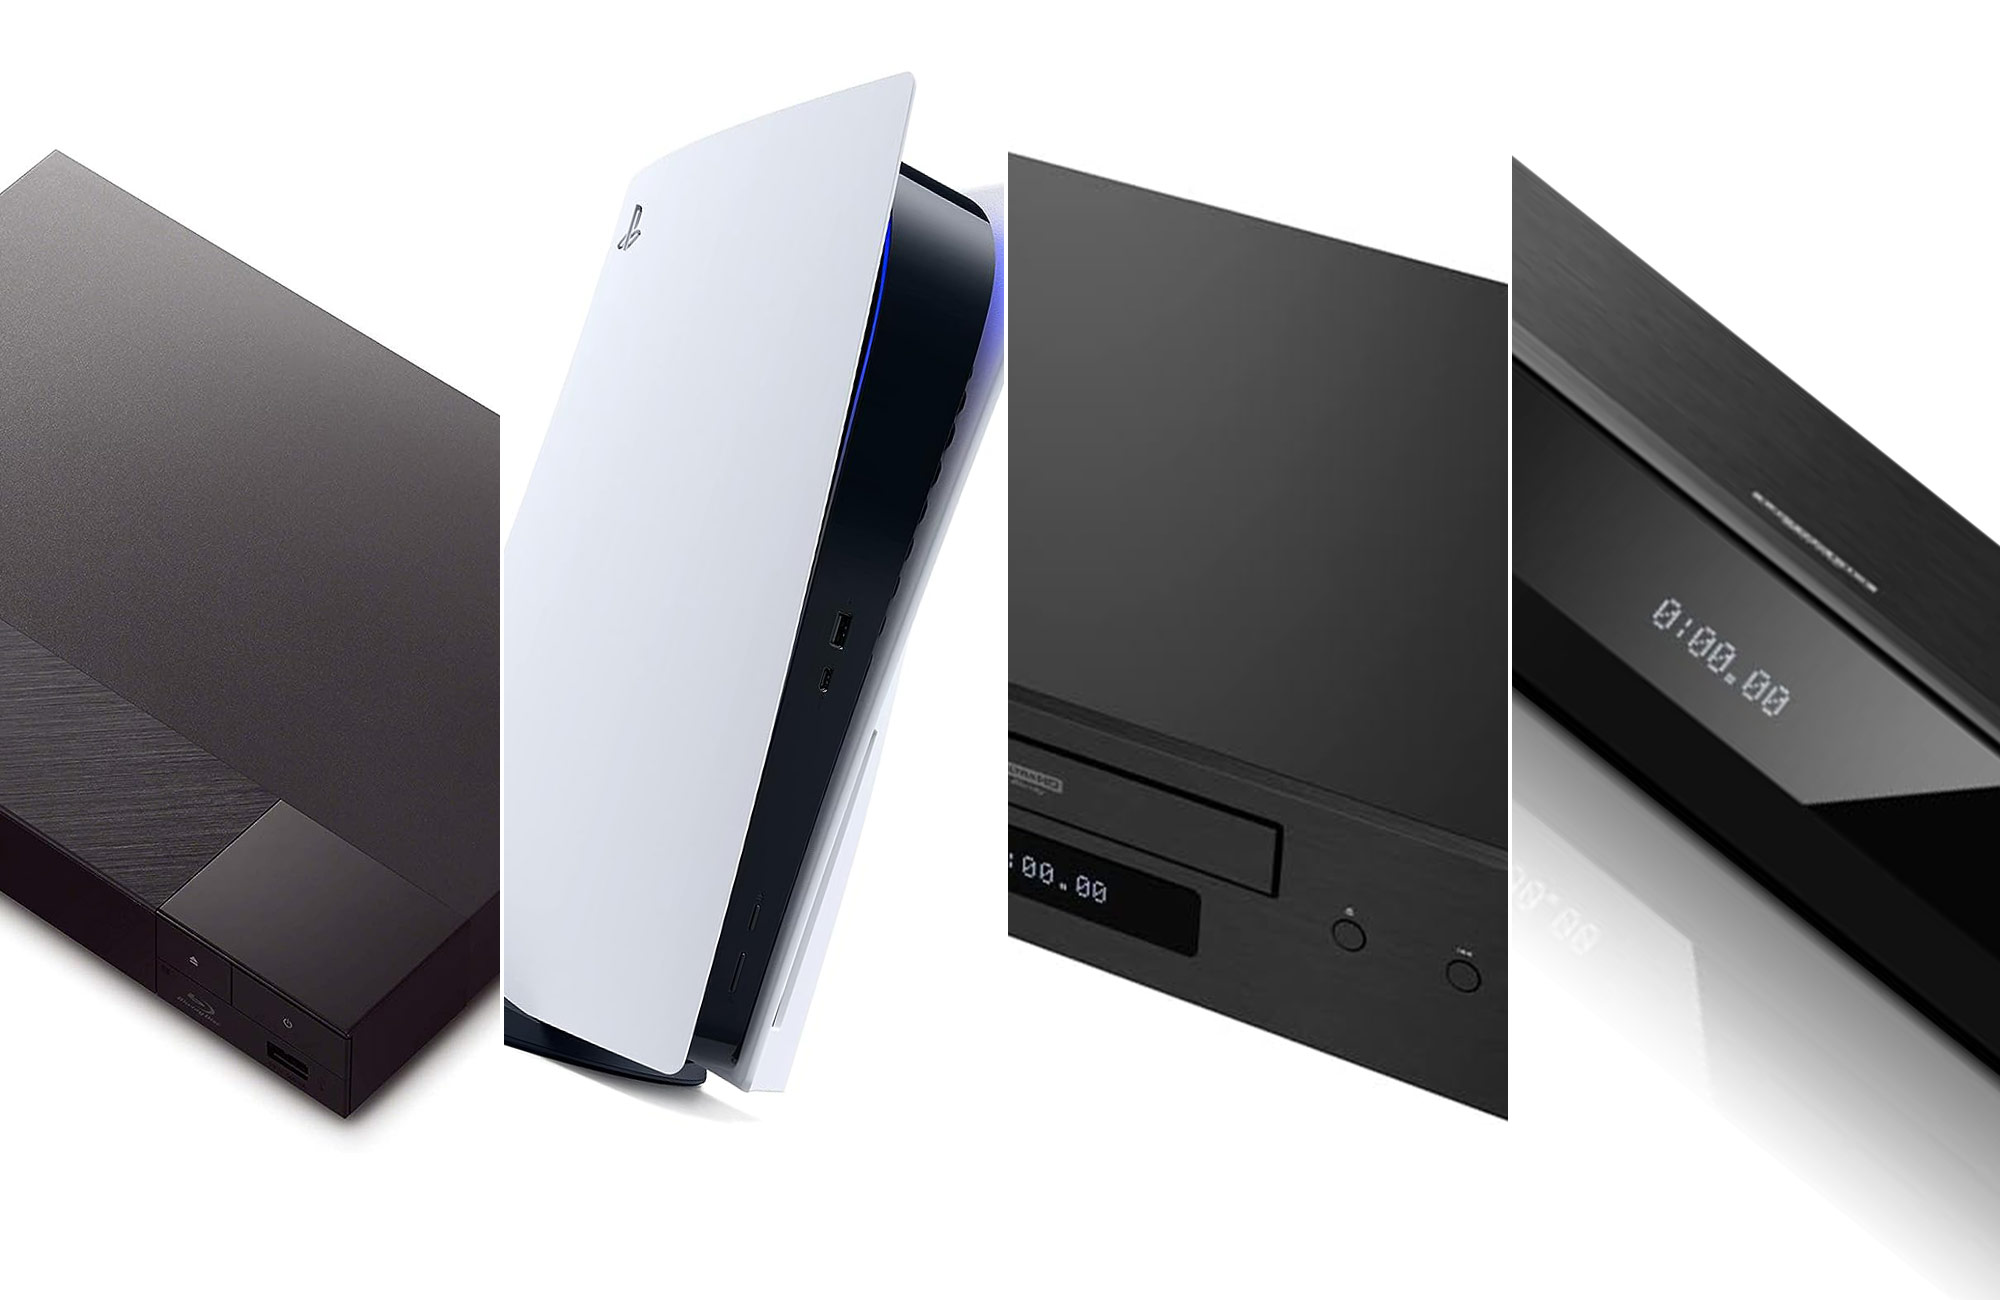 4k Movie, Streaming, Blu-Ray Disc, and Home Theater Product Reviews & News